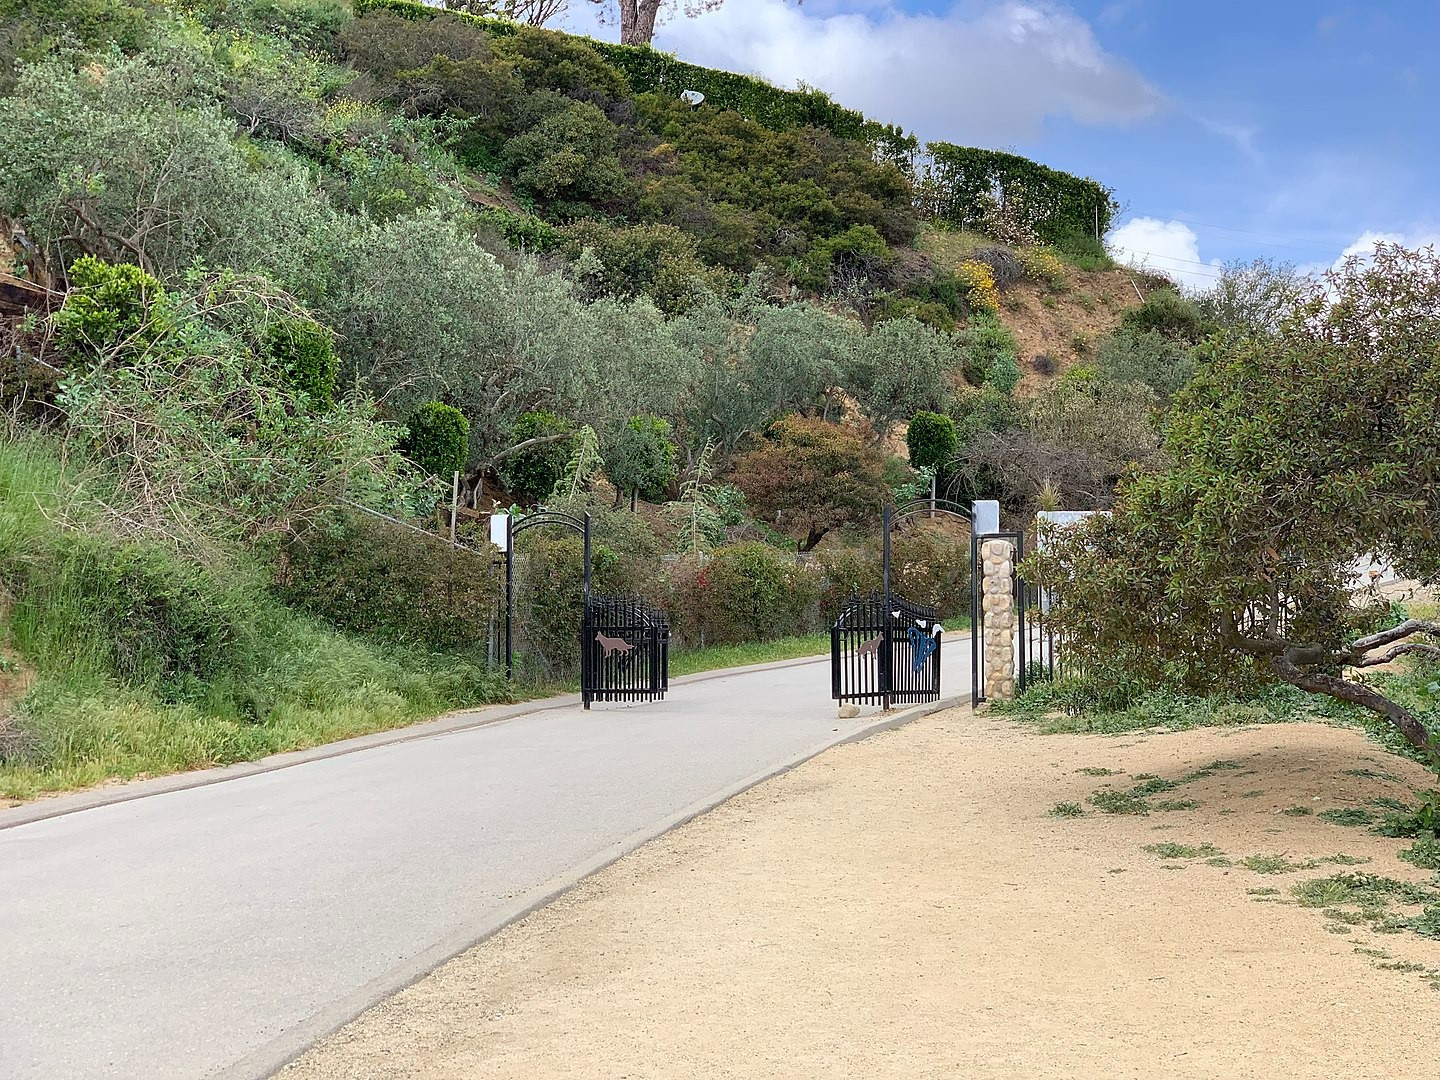 By Crishazzard - Own work,https://hikingguy.com/hiking-trails/best-la-hikes/runyon-canyon-hike-directions/, CC BY-SA 4.0, https://commons.wikimedia.org/w/index.php?curid=78772444